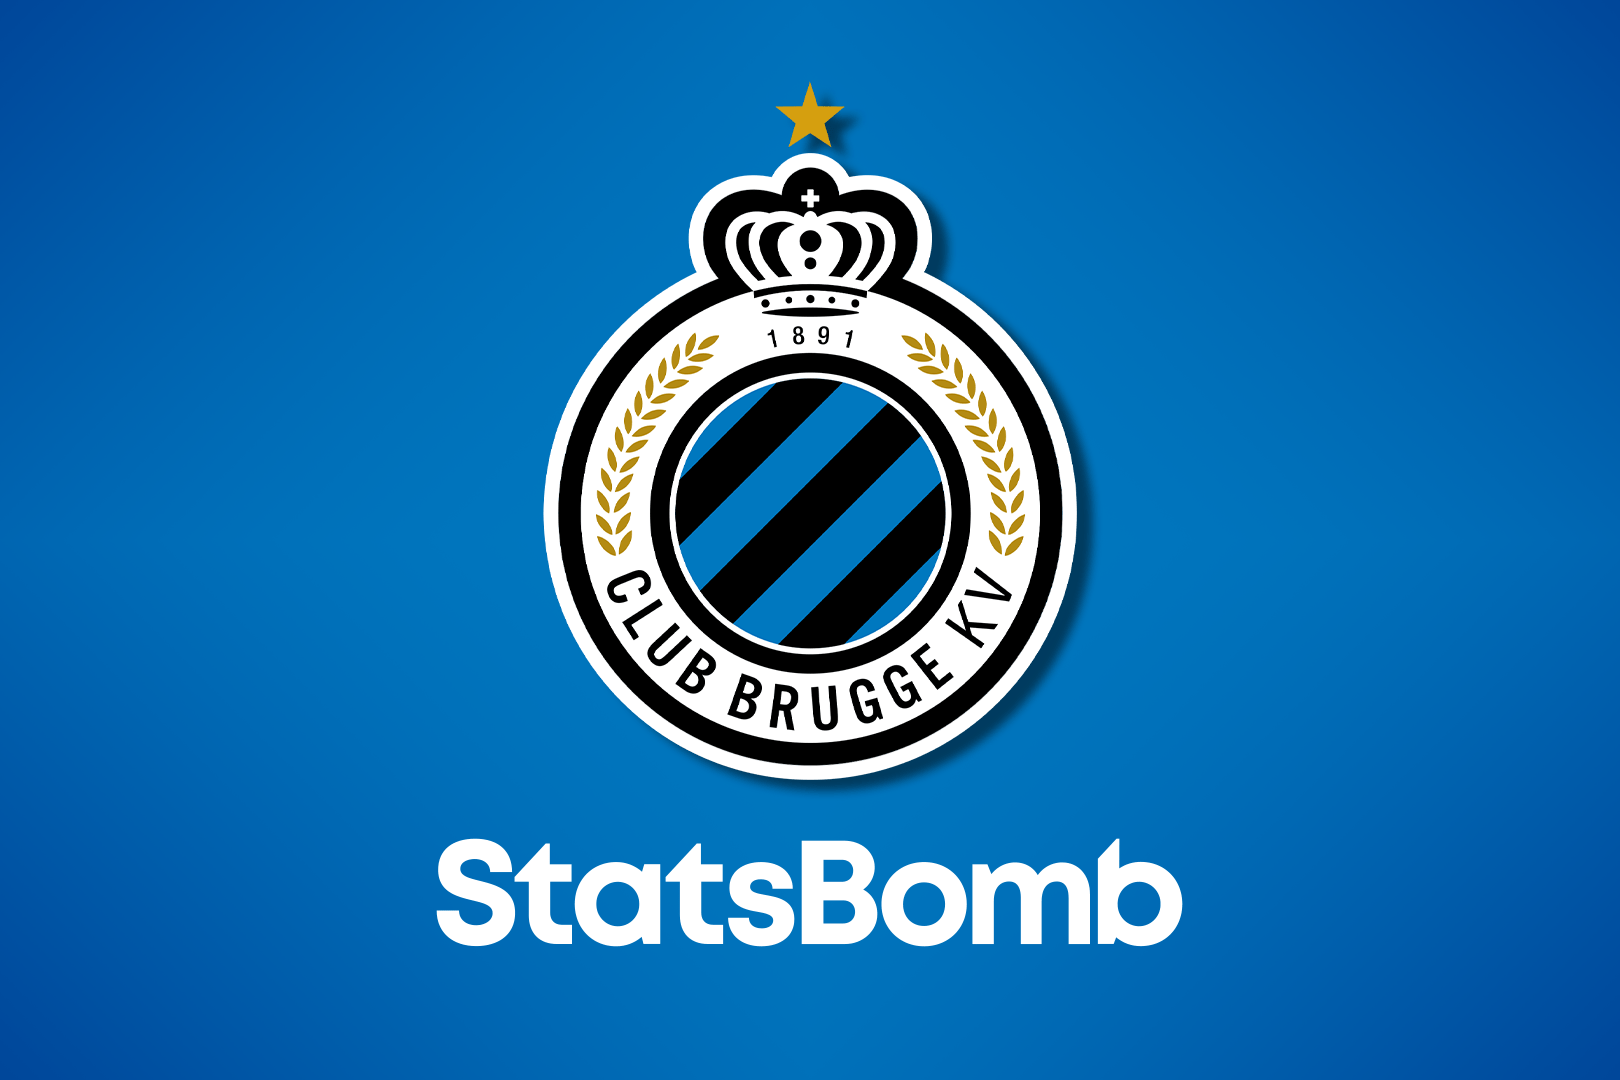 StatsBomb Announce Partnership With Club Brugge